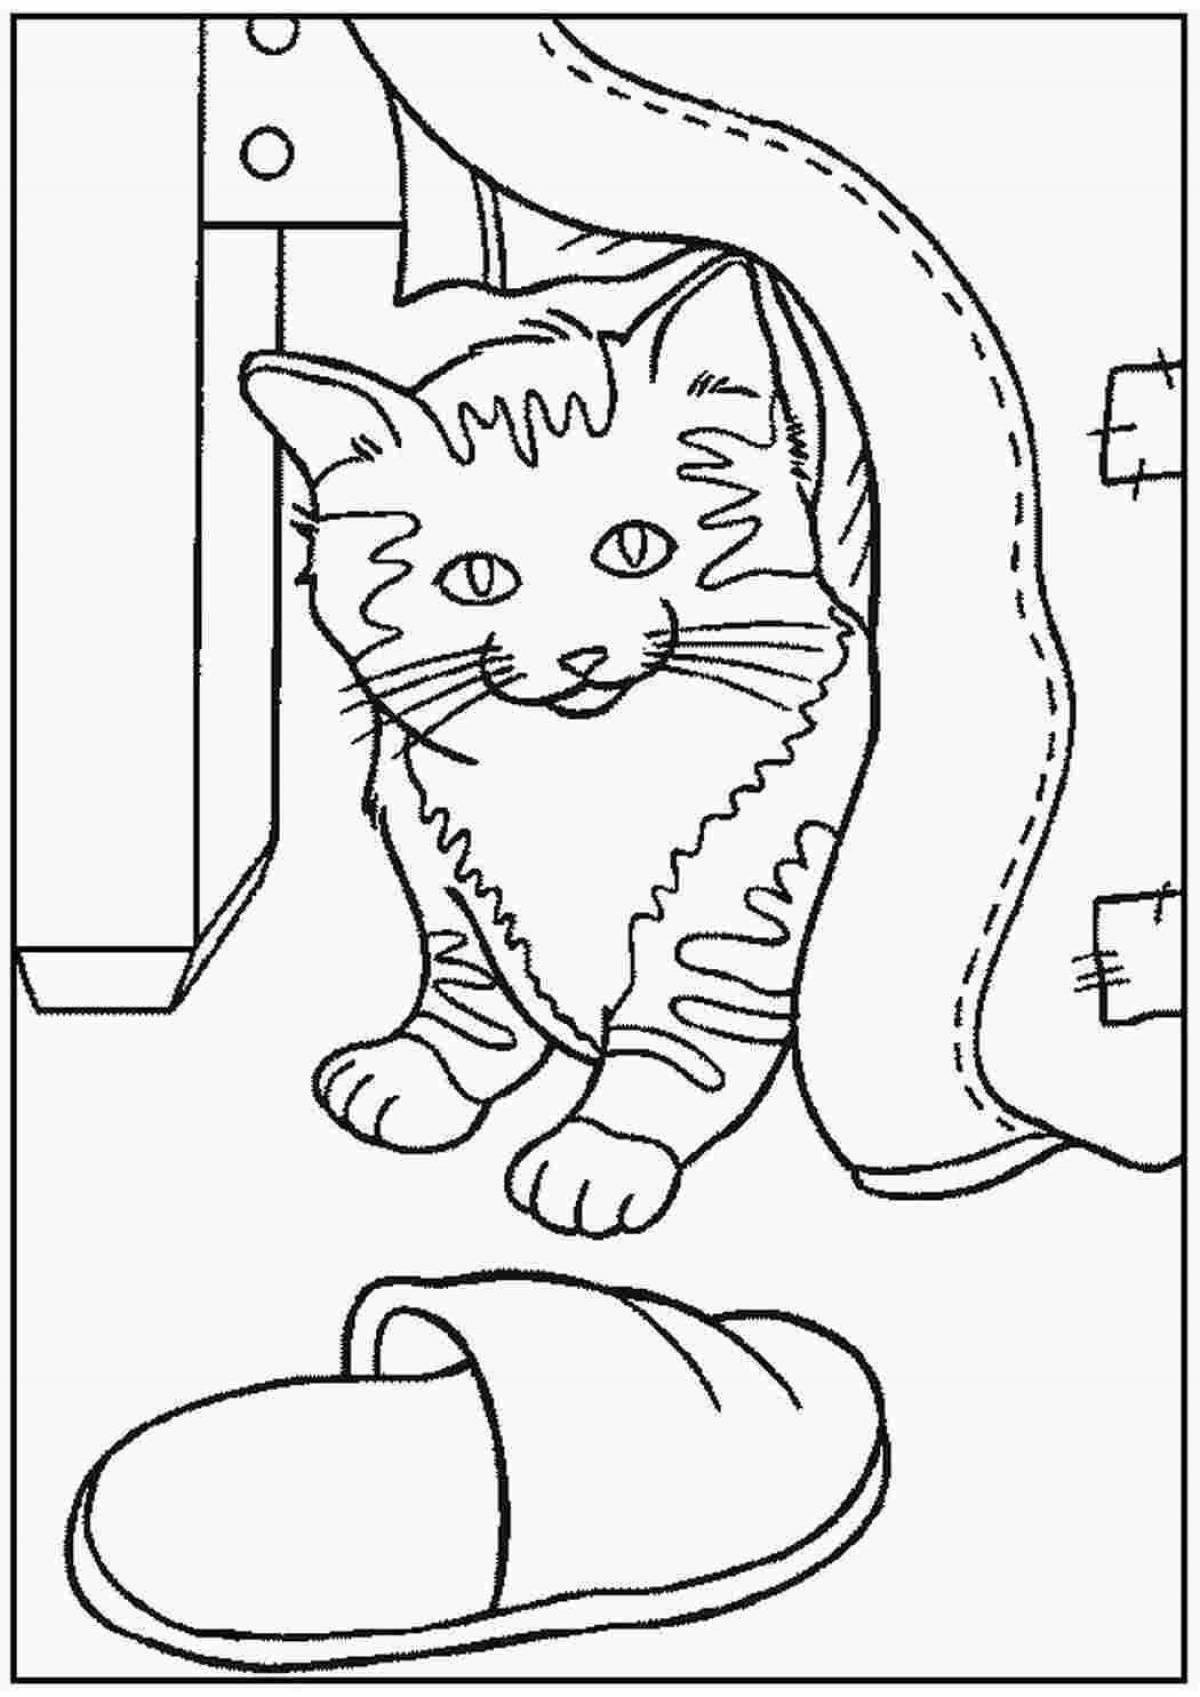 Coloring page serene cat in a box